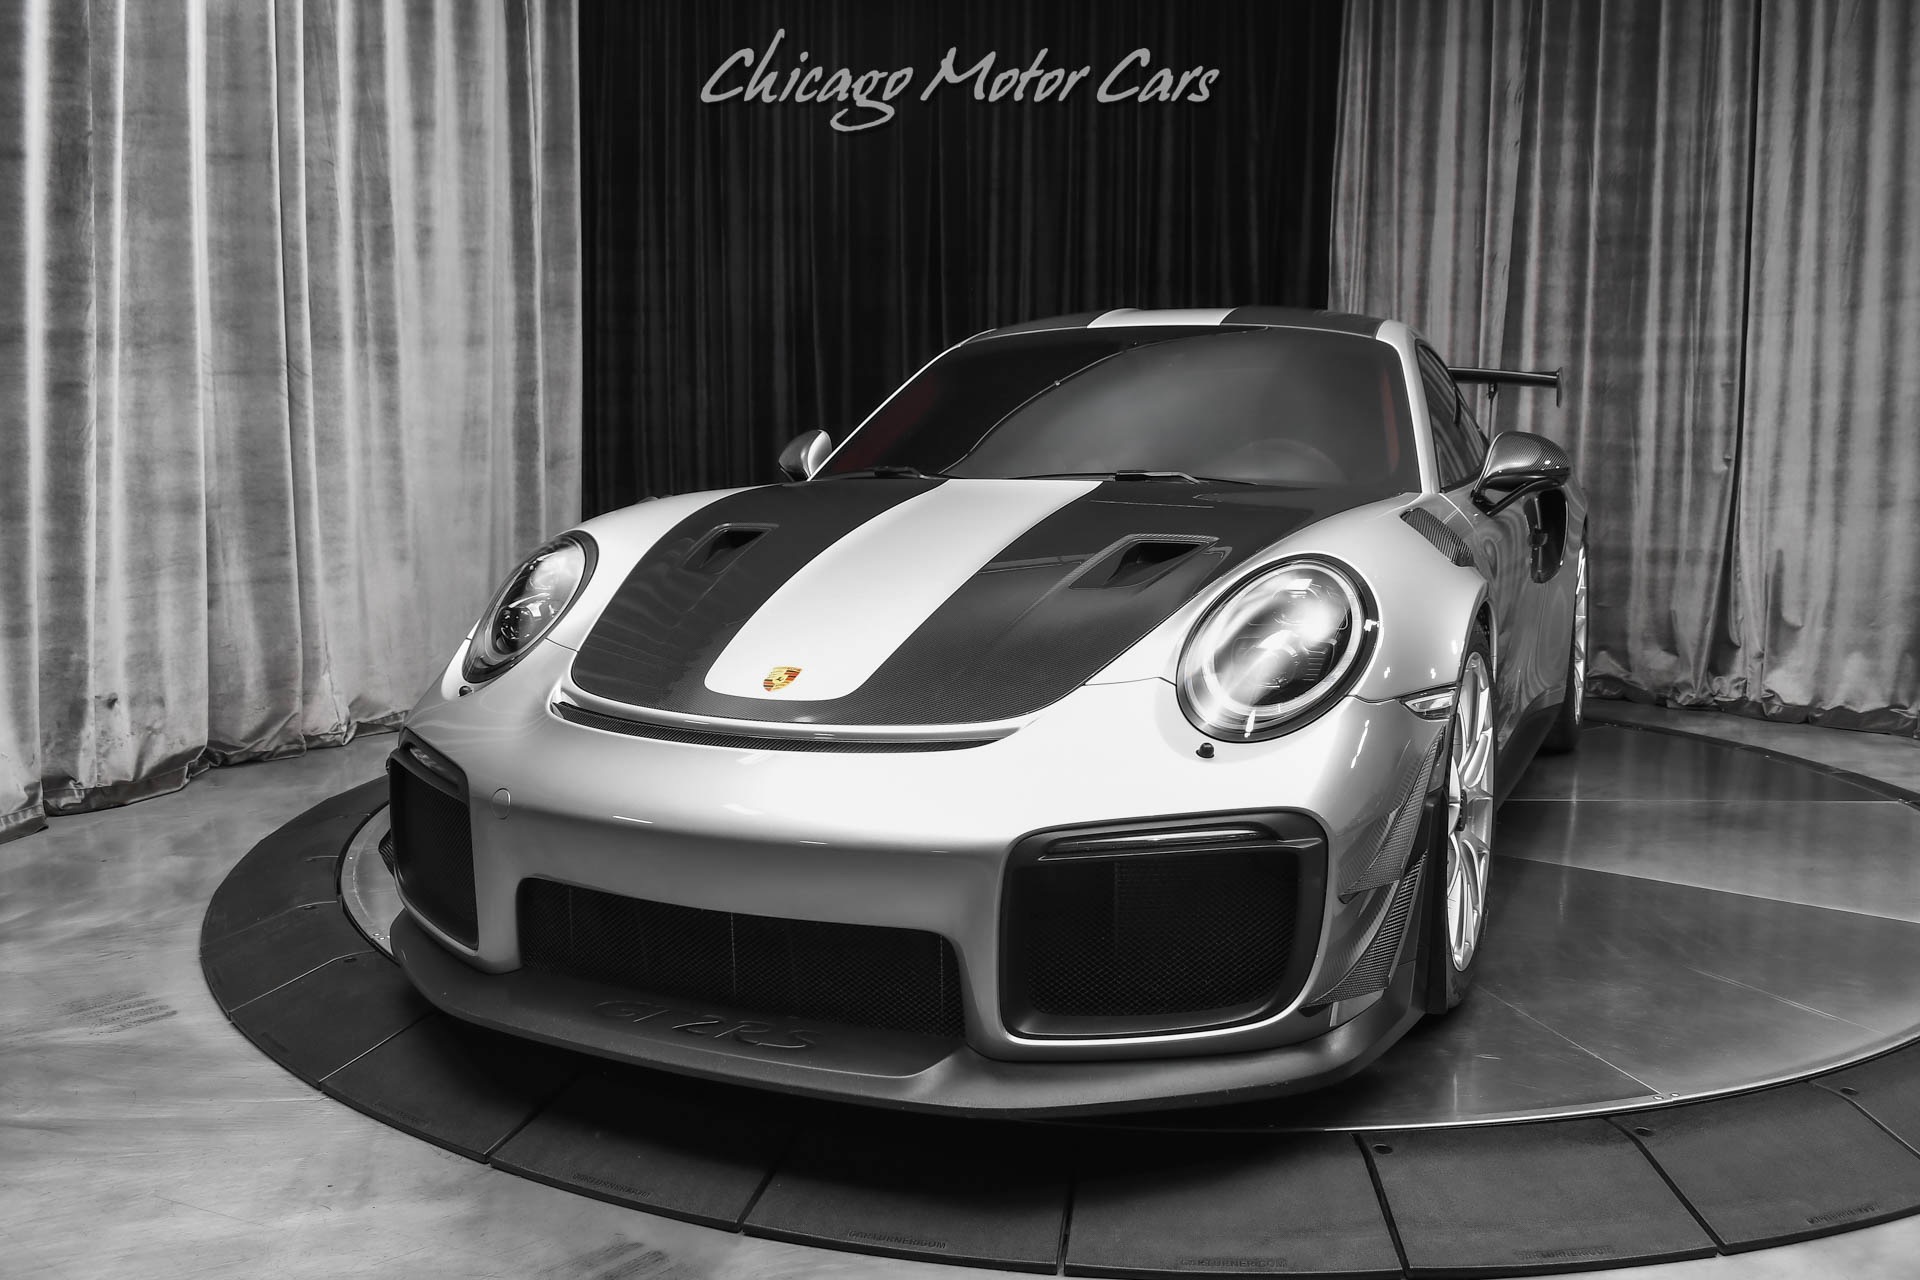 Used-2018-Porsche-911-GT2-RS-Weissach-Pkg-Magnesium-Wheels-TONS-of-Carbon-HOT-Spec-FULL-PPF